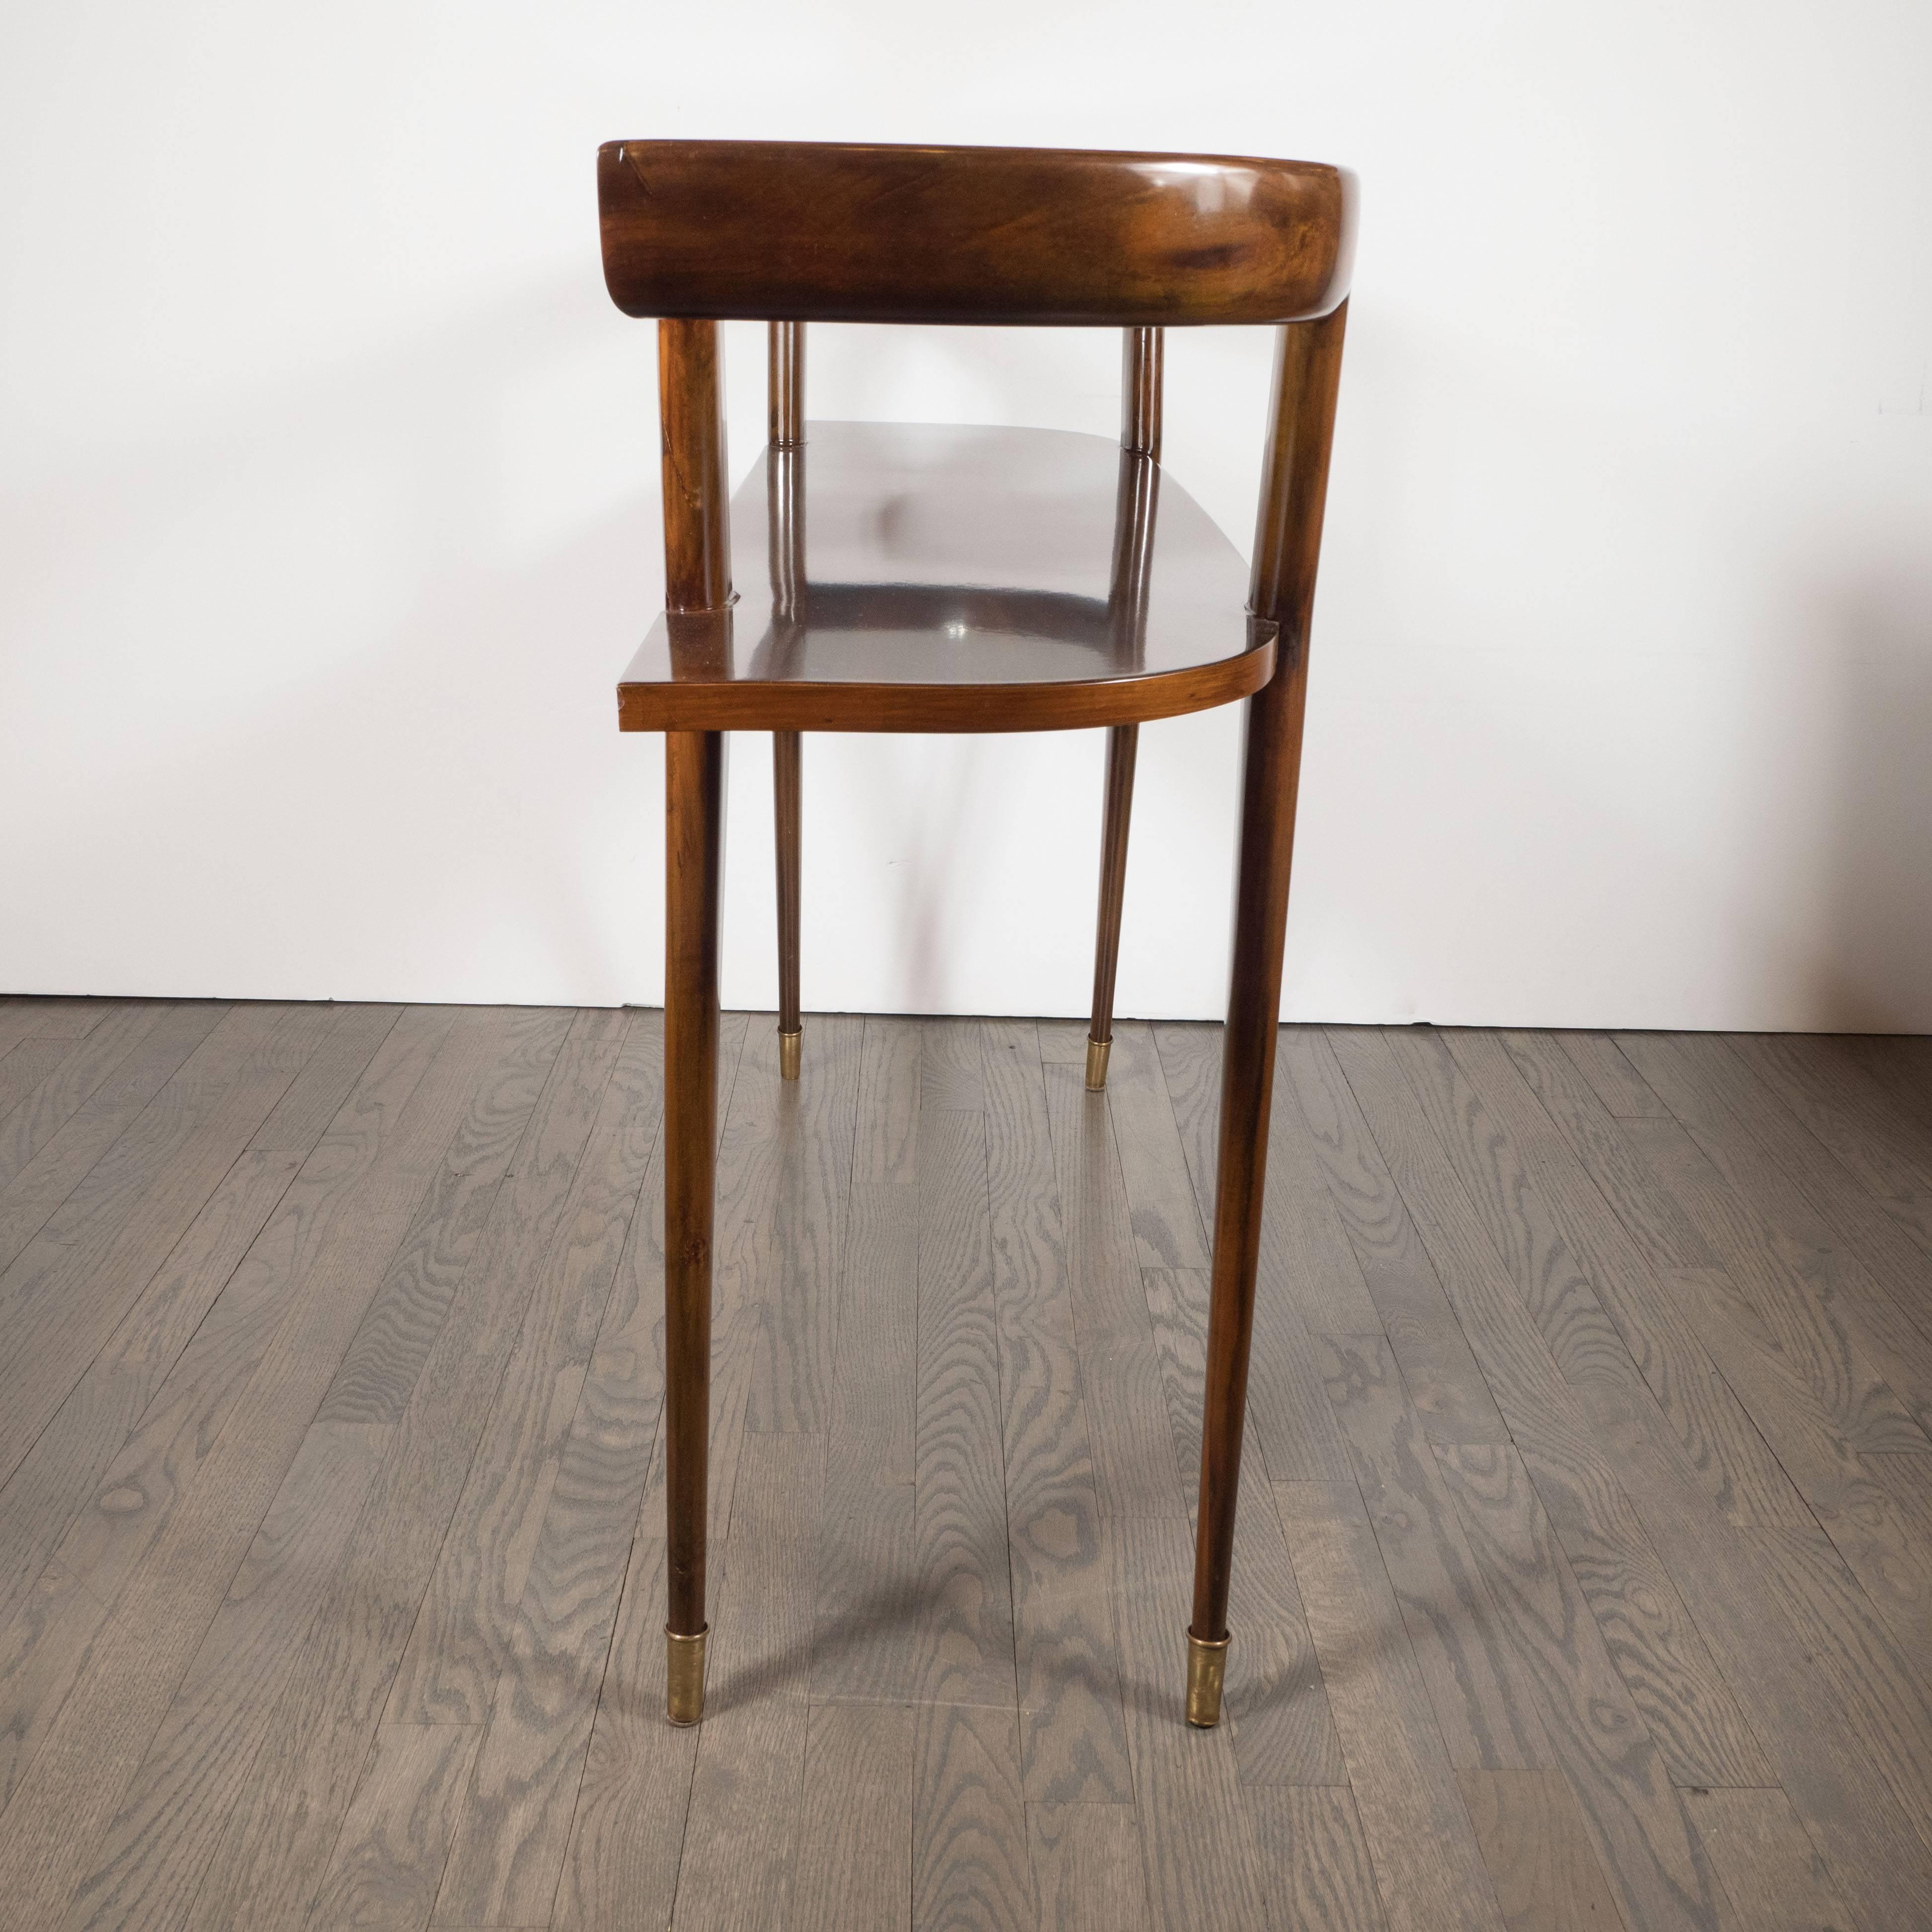 Mid-20th Century Sophisticated Mid-Century Modernist Console in Hand Rubbed Walnut and Glass